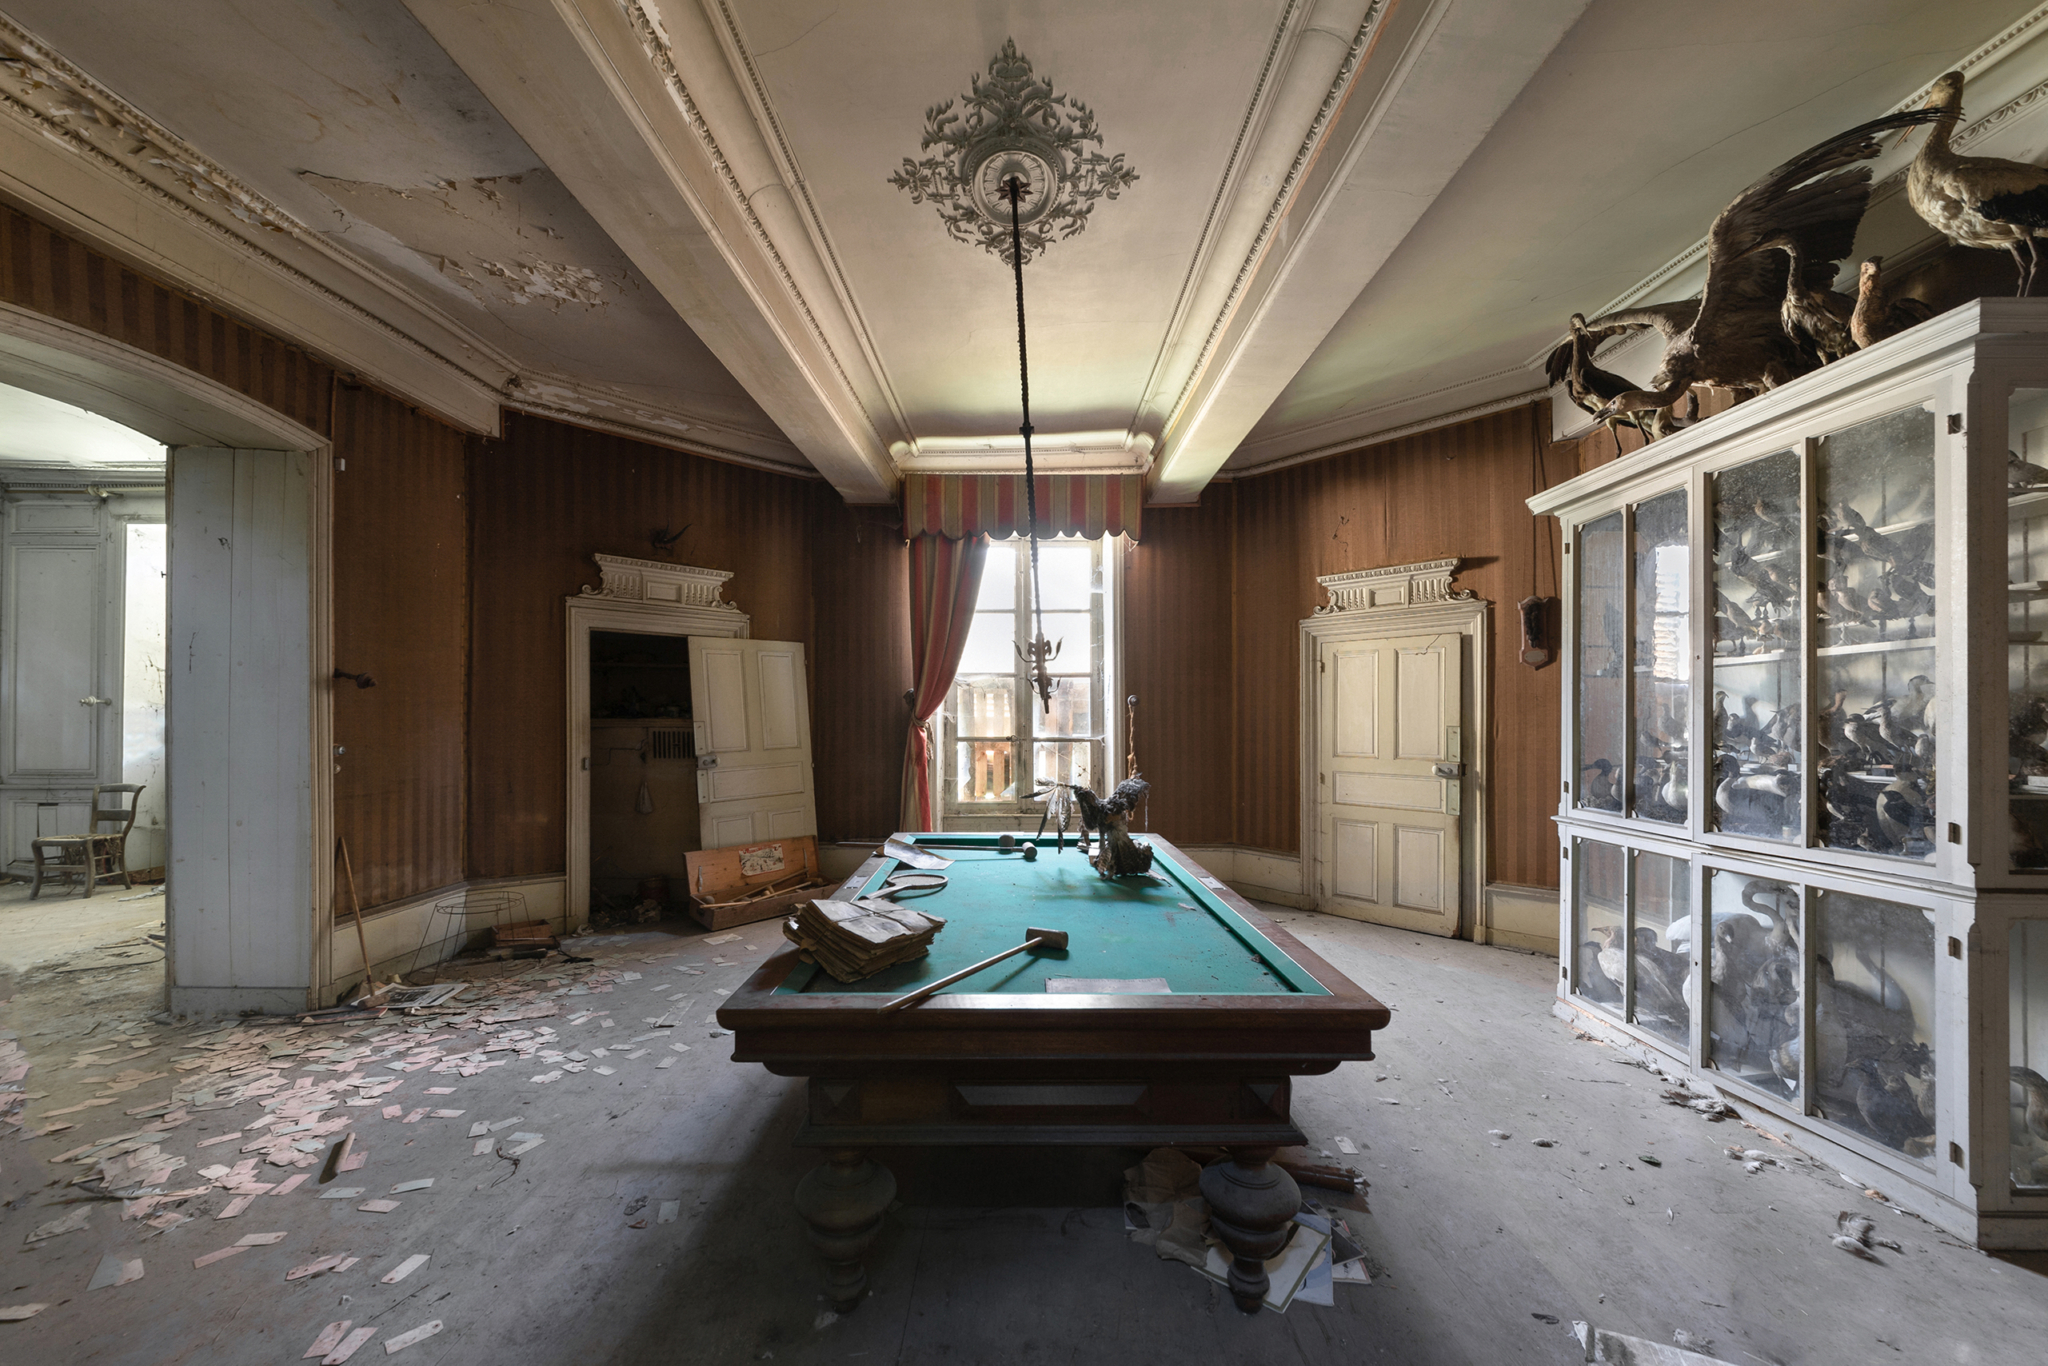 Abandoned room with a french pool inside a derelict castle